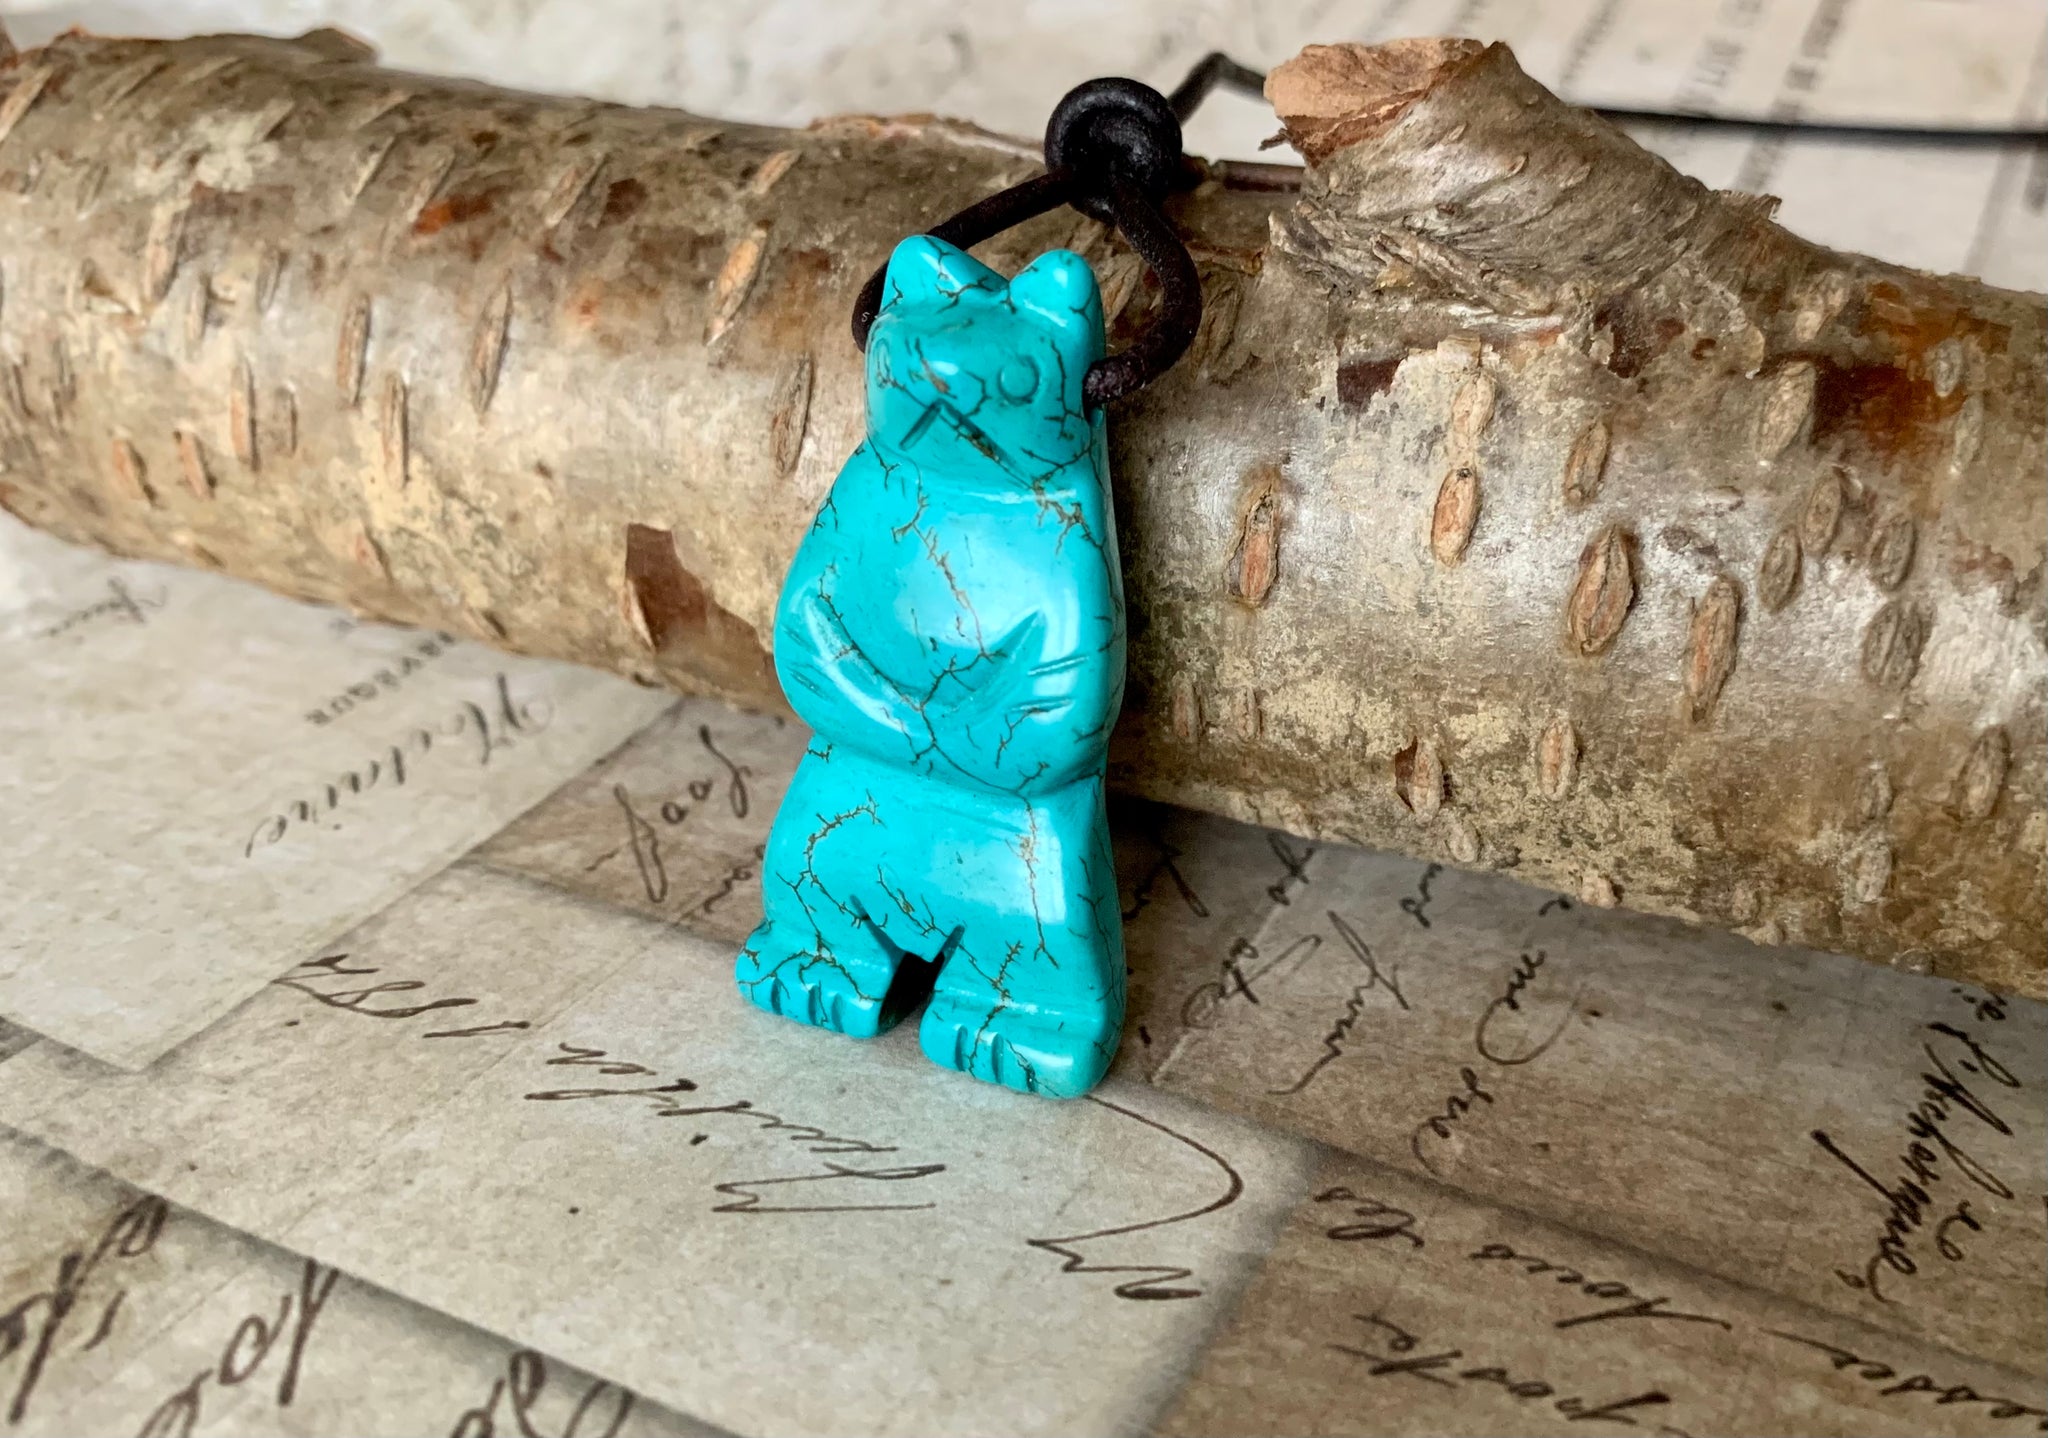 Buy Bear Brothers Totem Necklace 3D Printing Online in India - Etsy